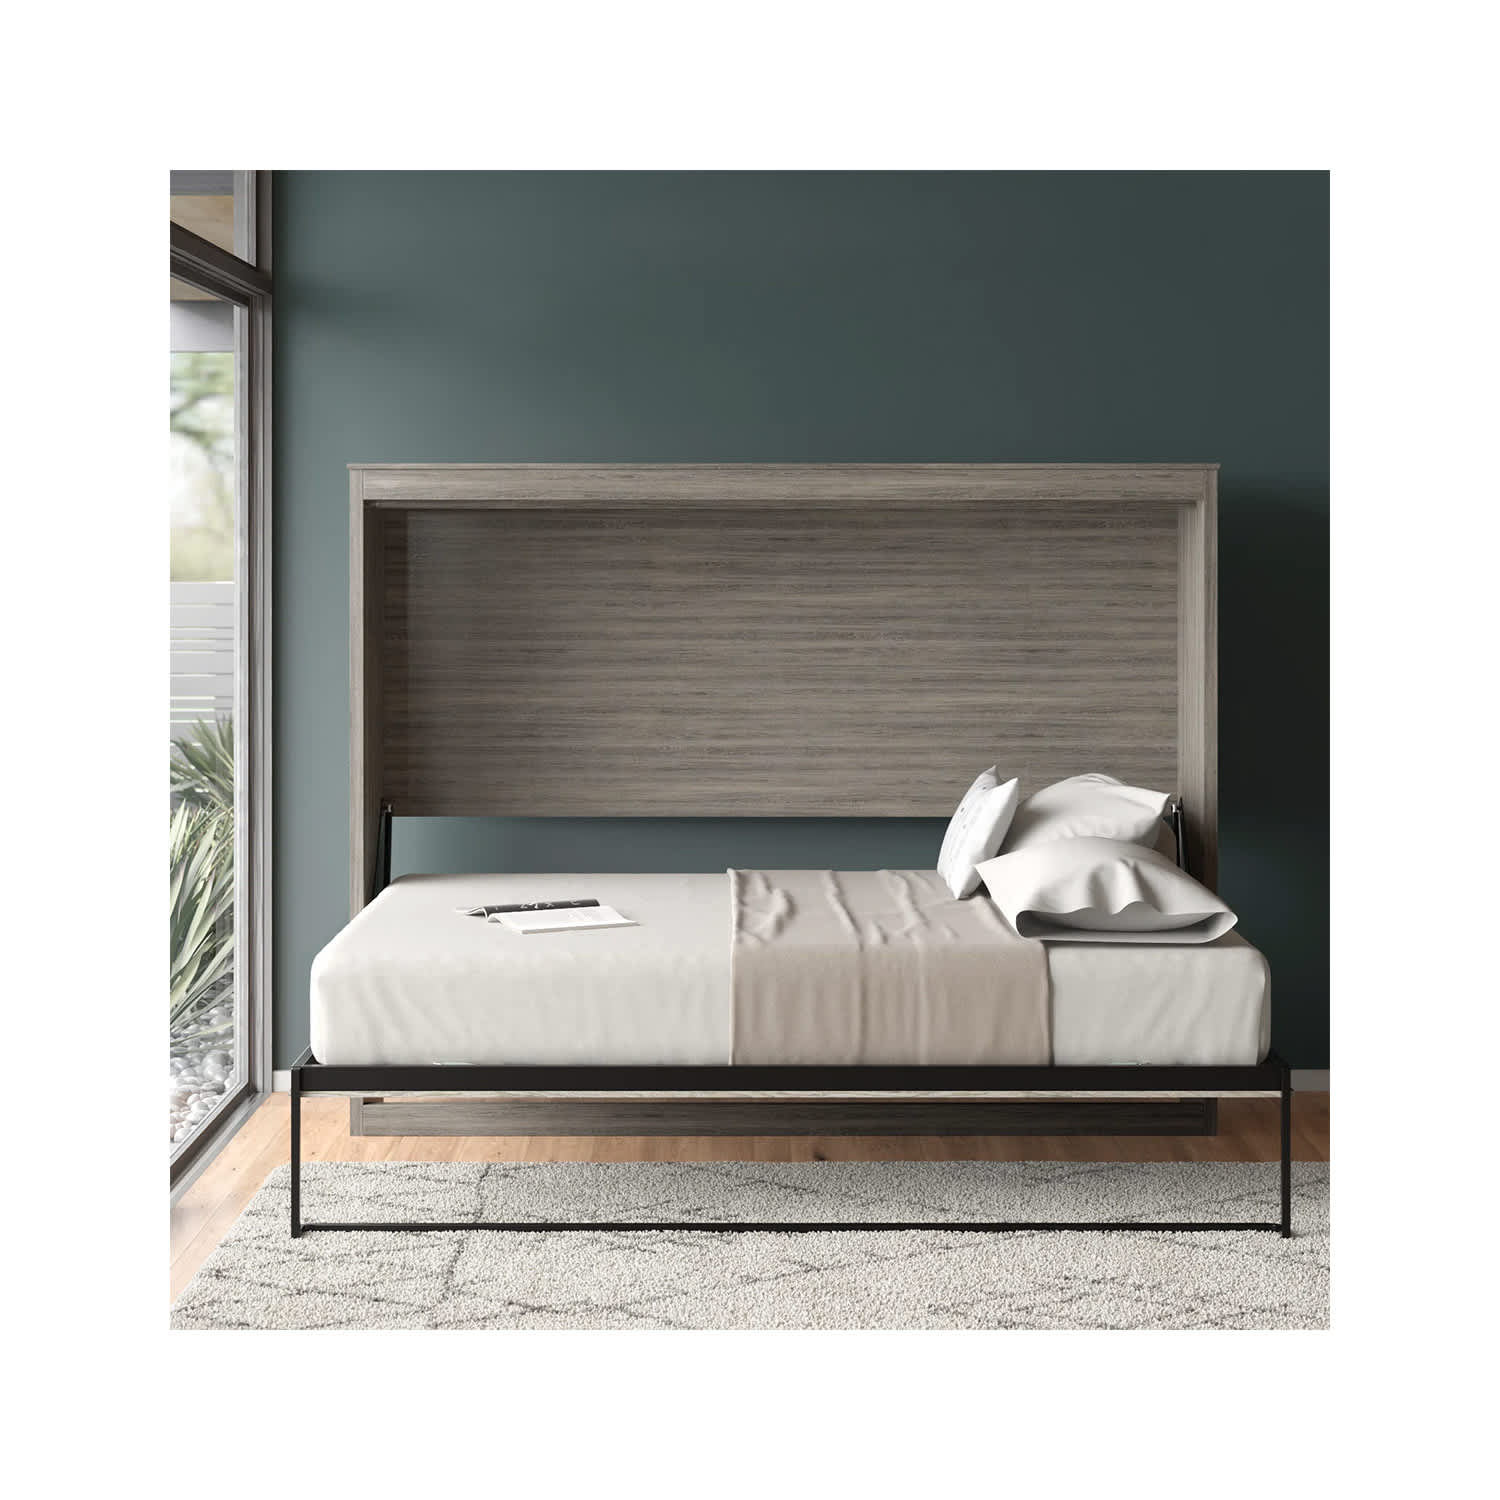 Harper & Bright Designs Full Size Murphy Bed, can be Folded into a Cabinet,  Gray